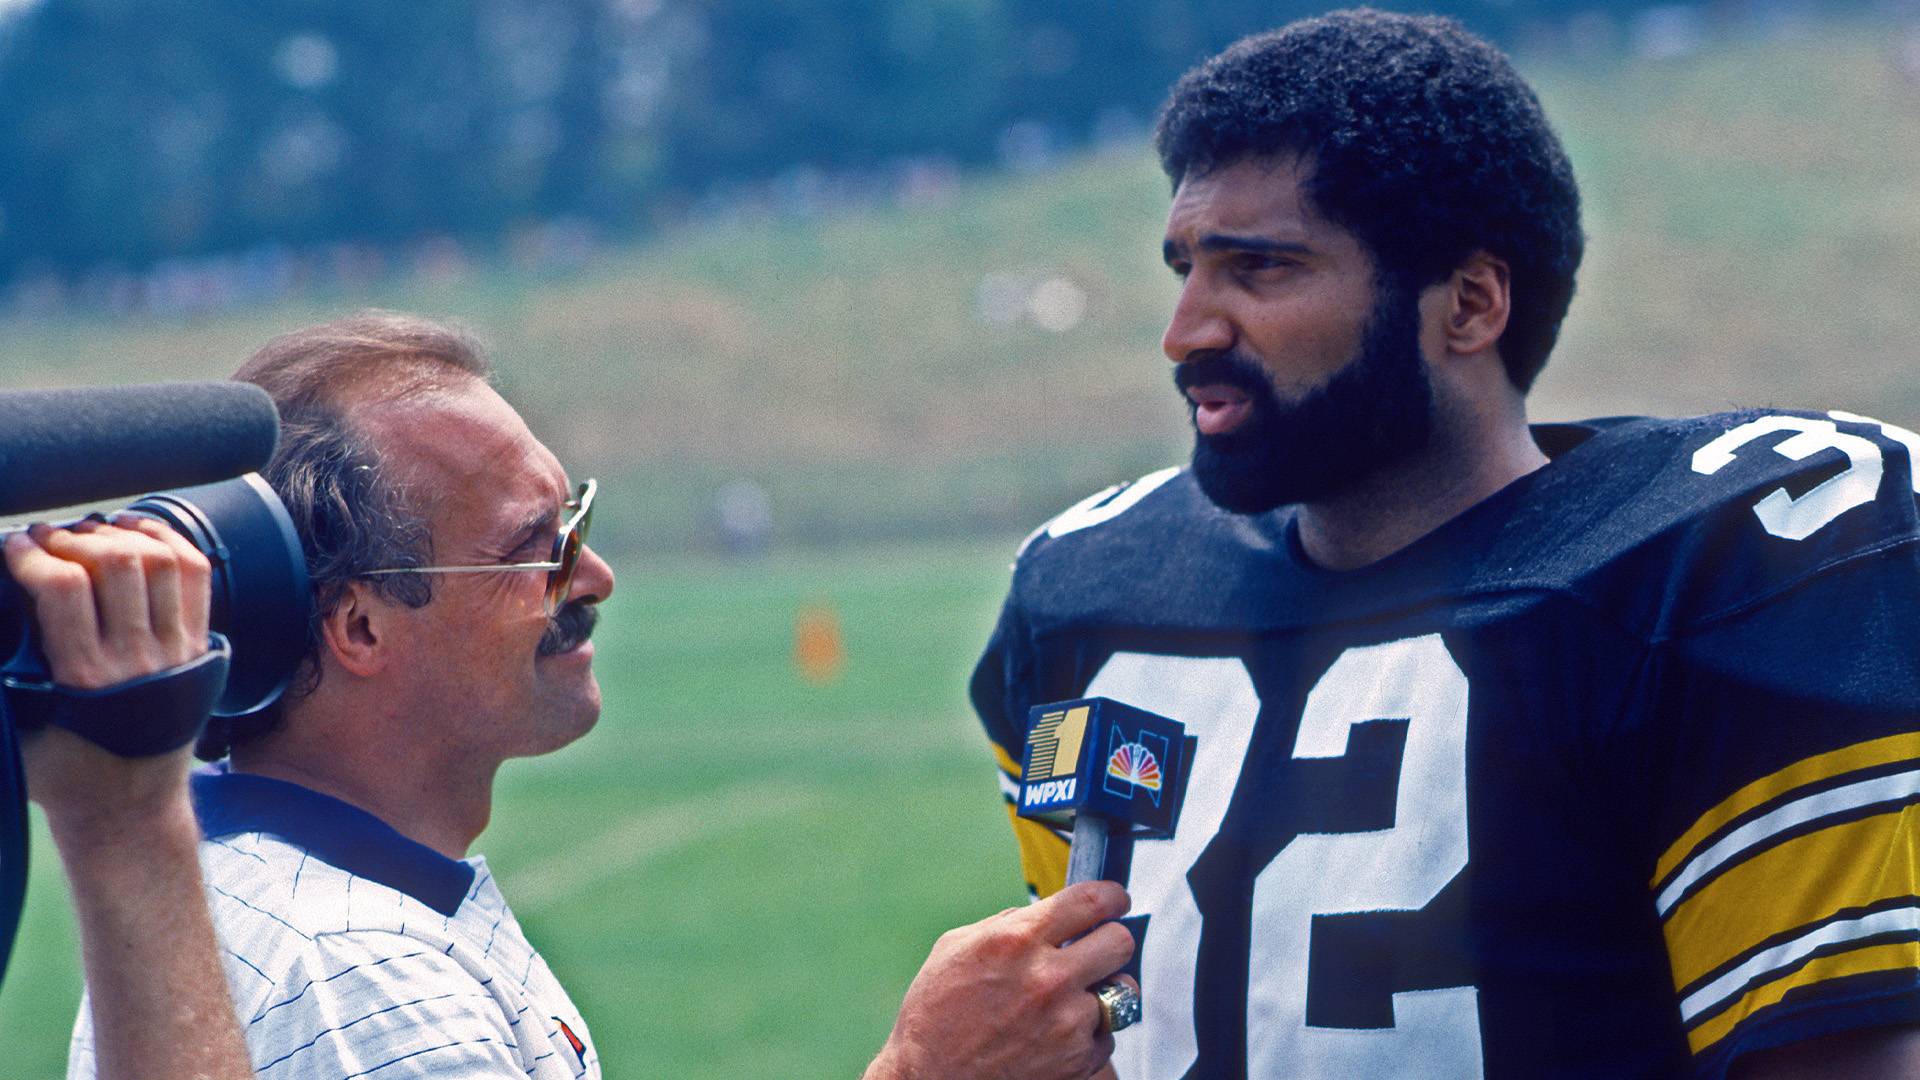 Steelers nation emotional as Franco Harris jersey is officially